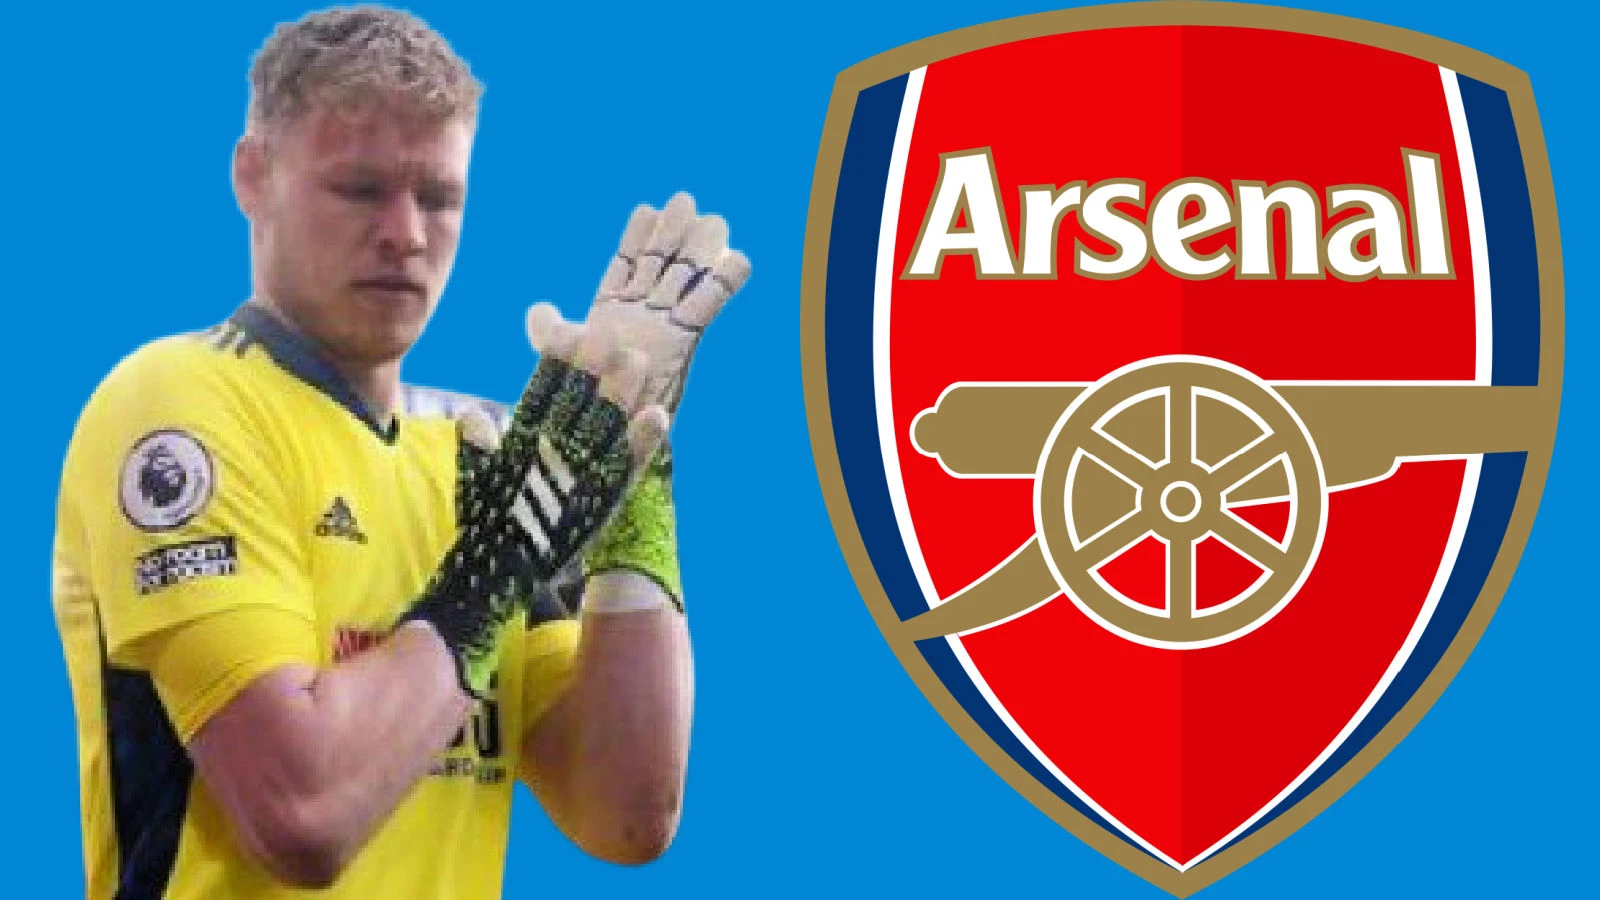 Aaron Ramsdale and Arsenal logo